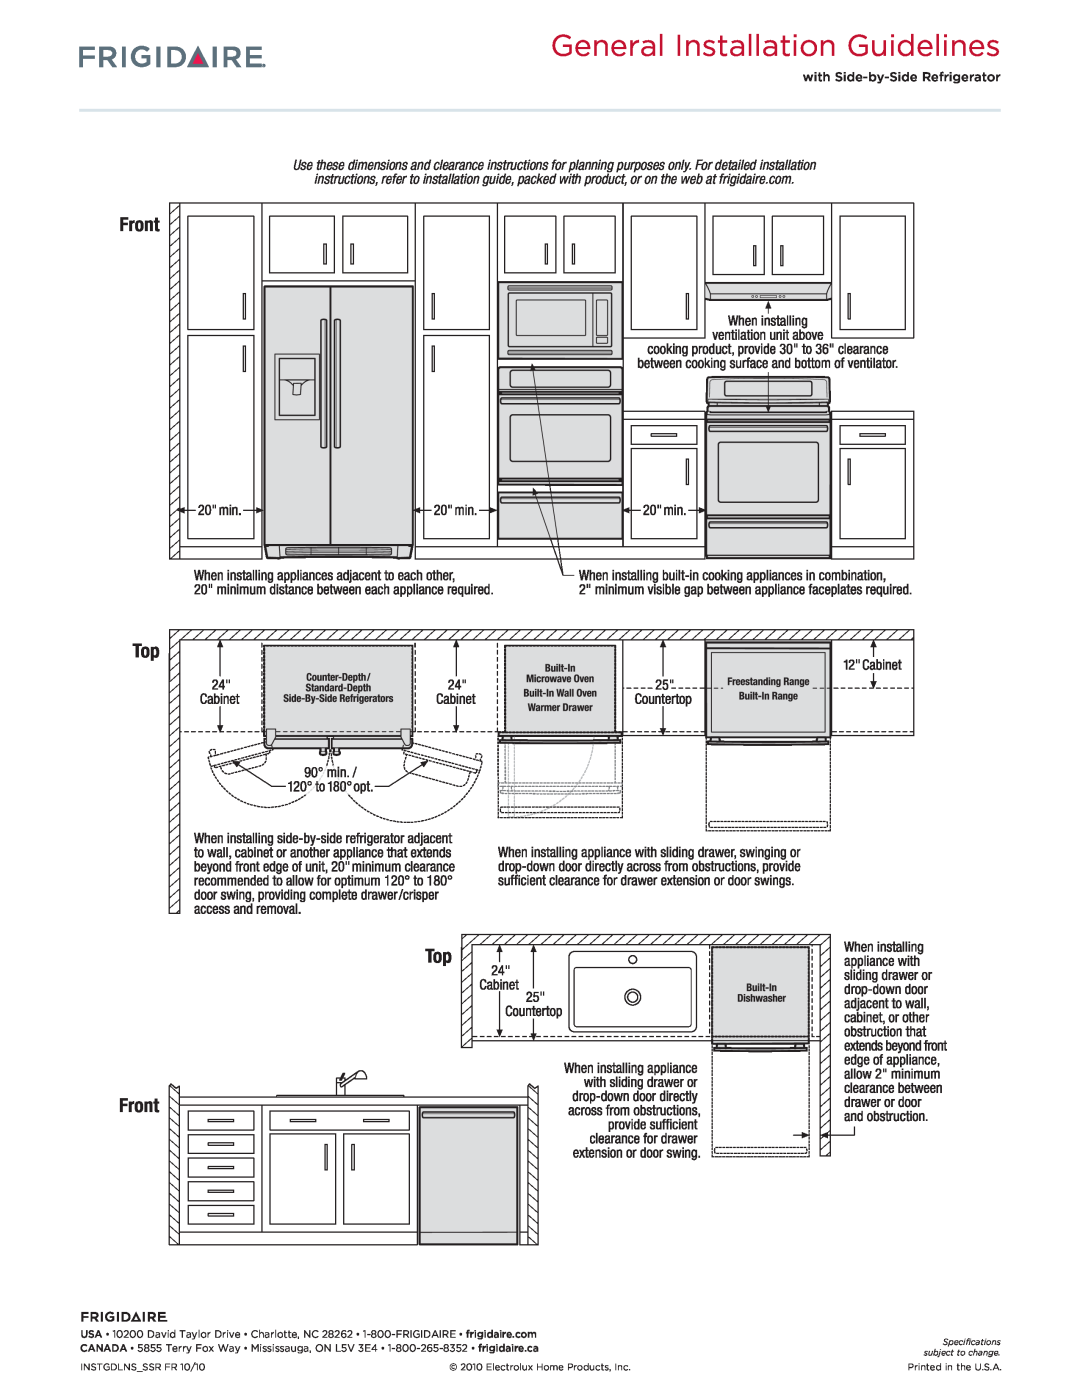 Frigidaire FFMV152CL dimensions General Installation Guidelines, Top Front 